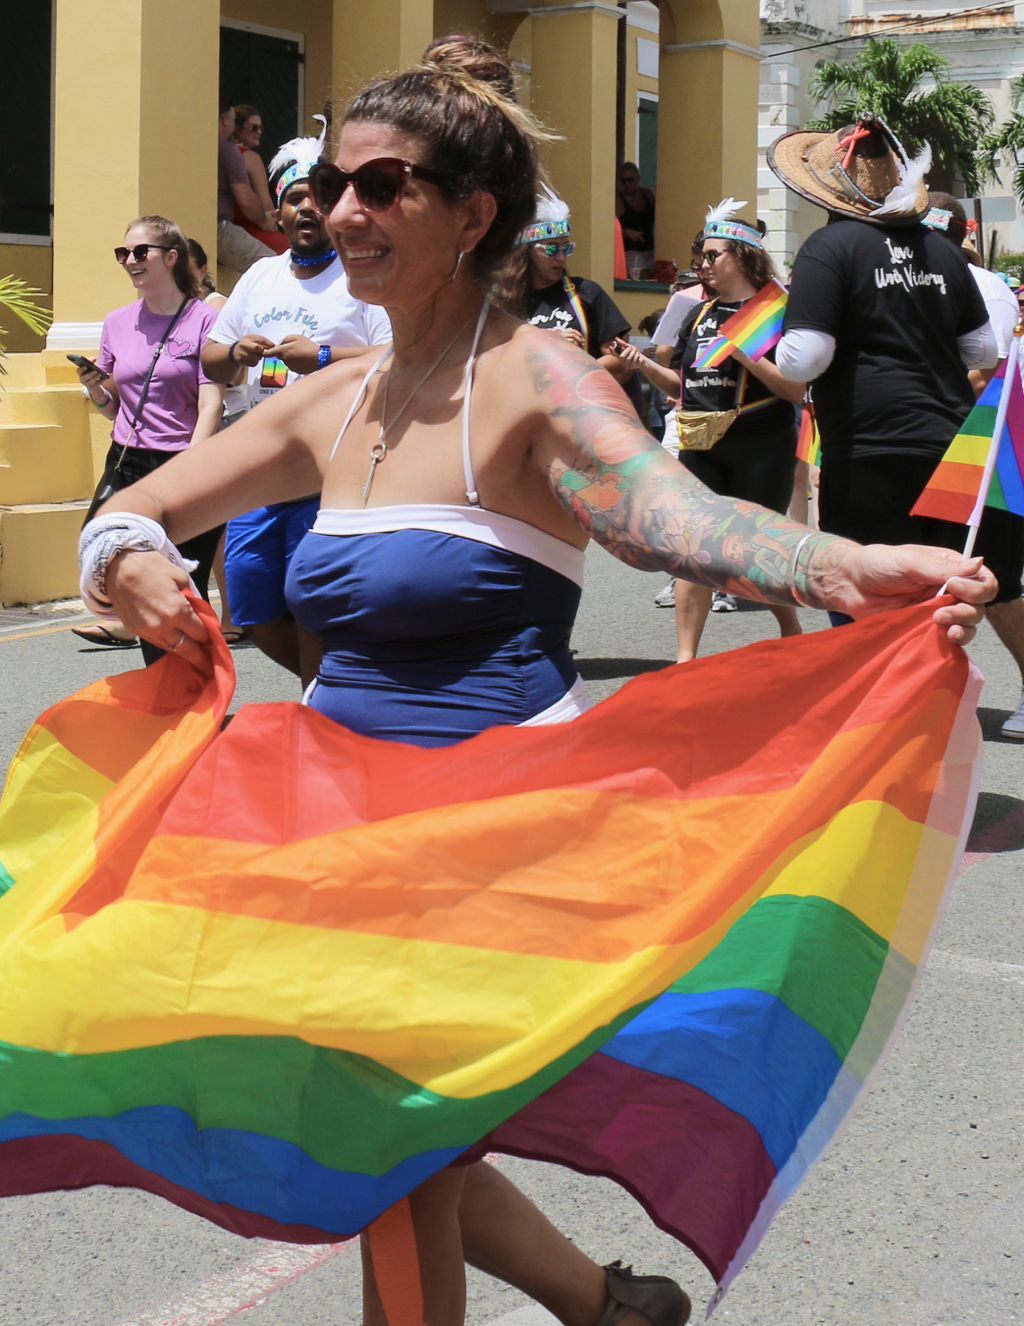 Rainbow flags and banners were in abundance during the parade. (Linda Morland photo)